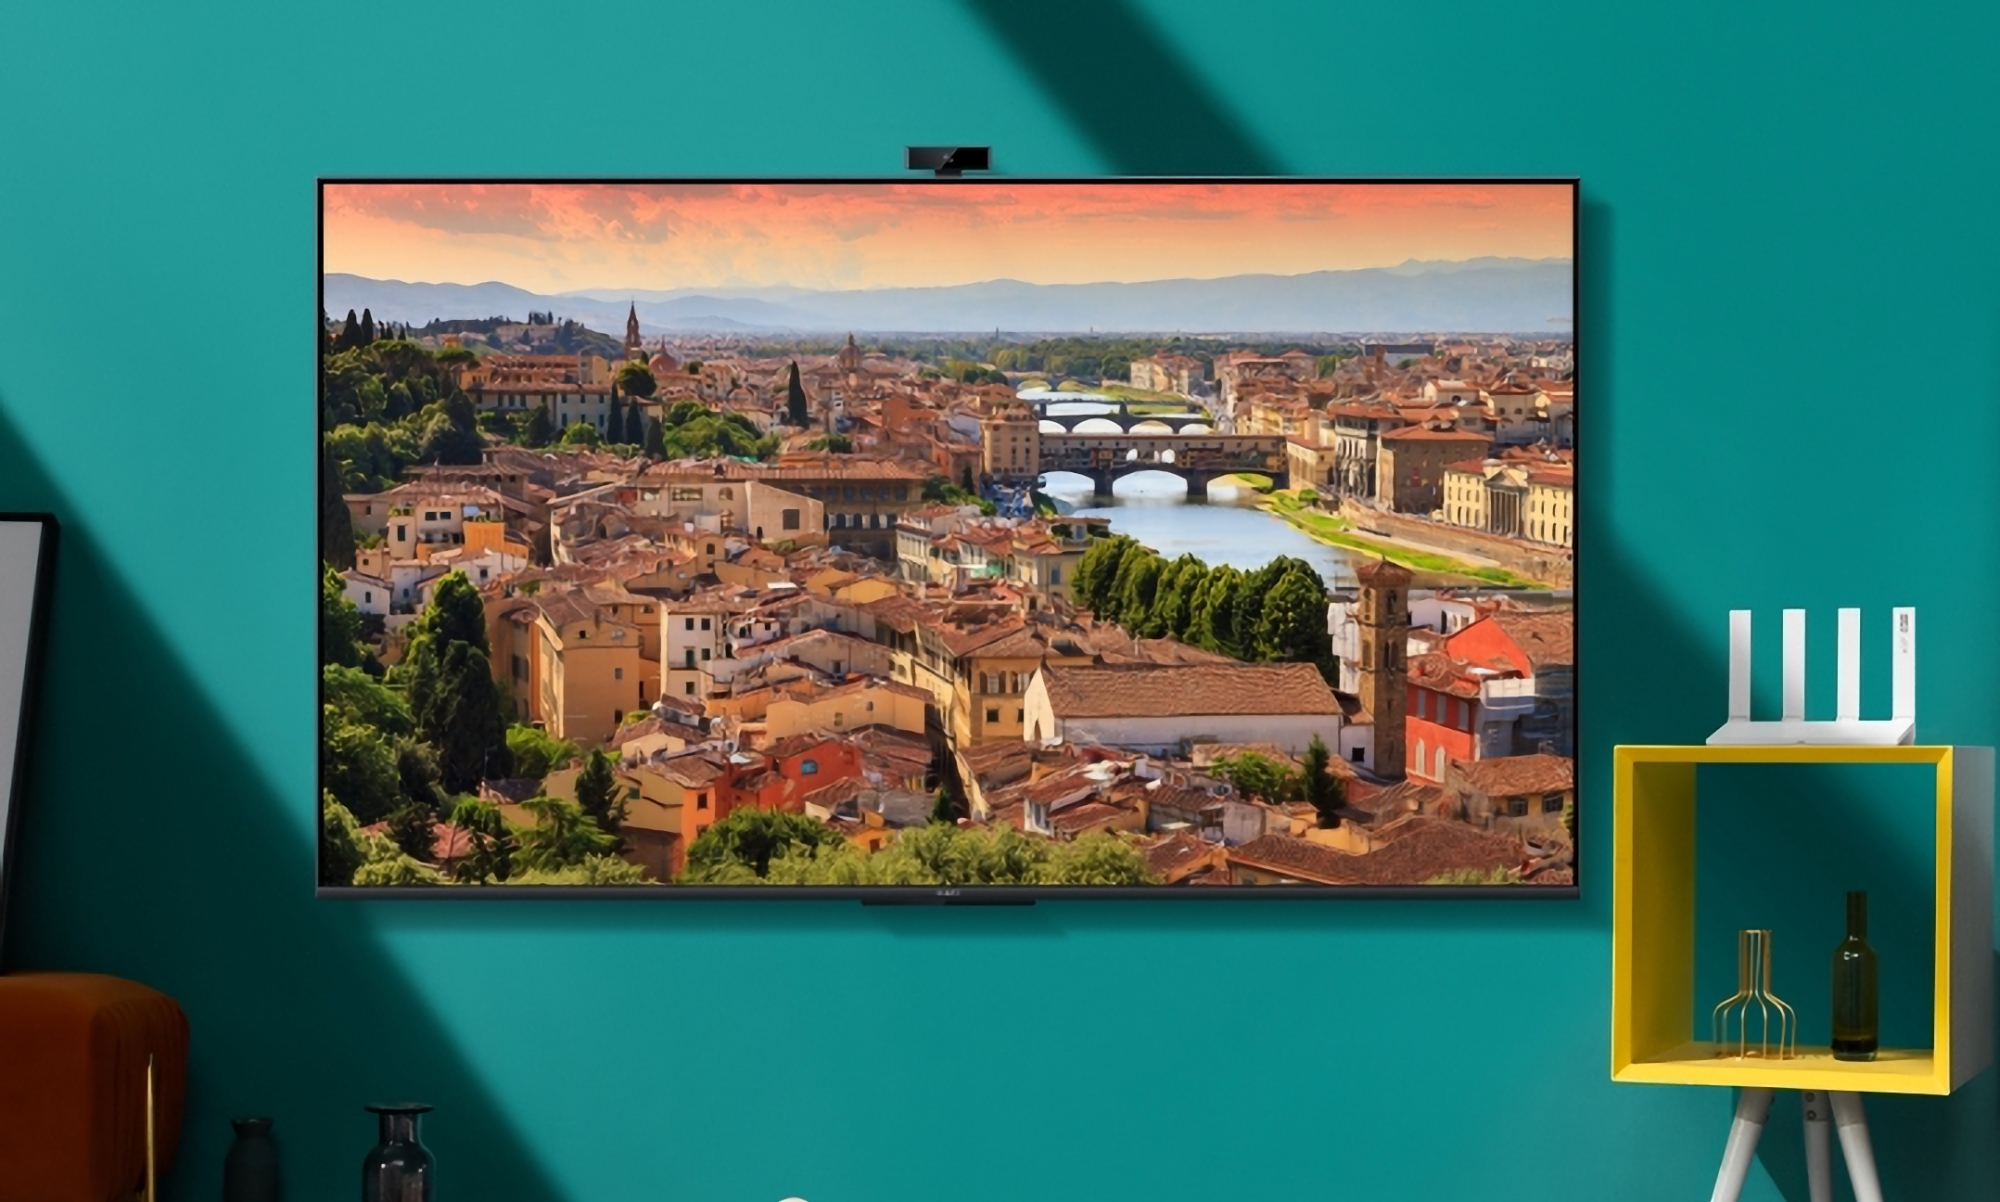 Huawei will unveil the Vision S86 Pro TV on July 27: It will be the company's first device with HarmonyOS 3.0 on board